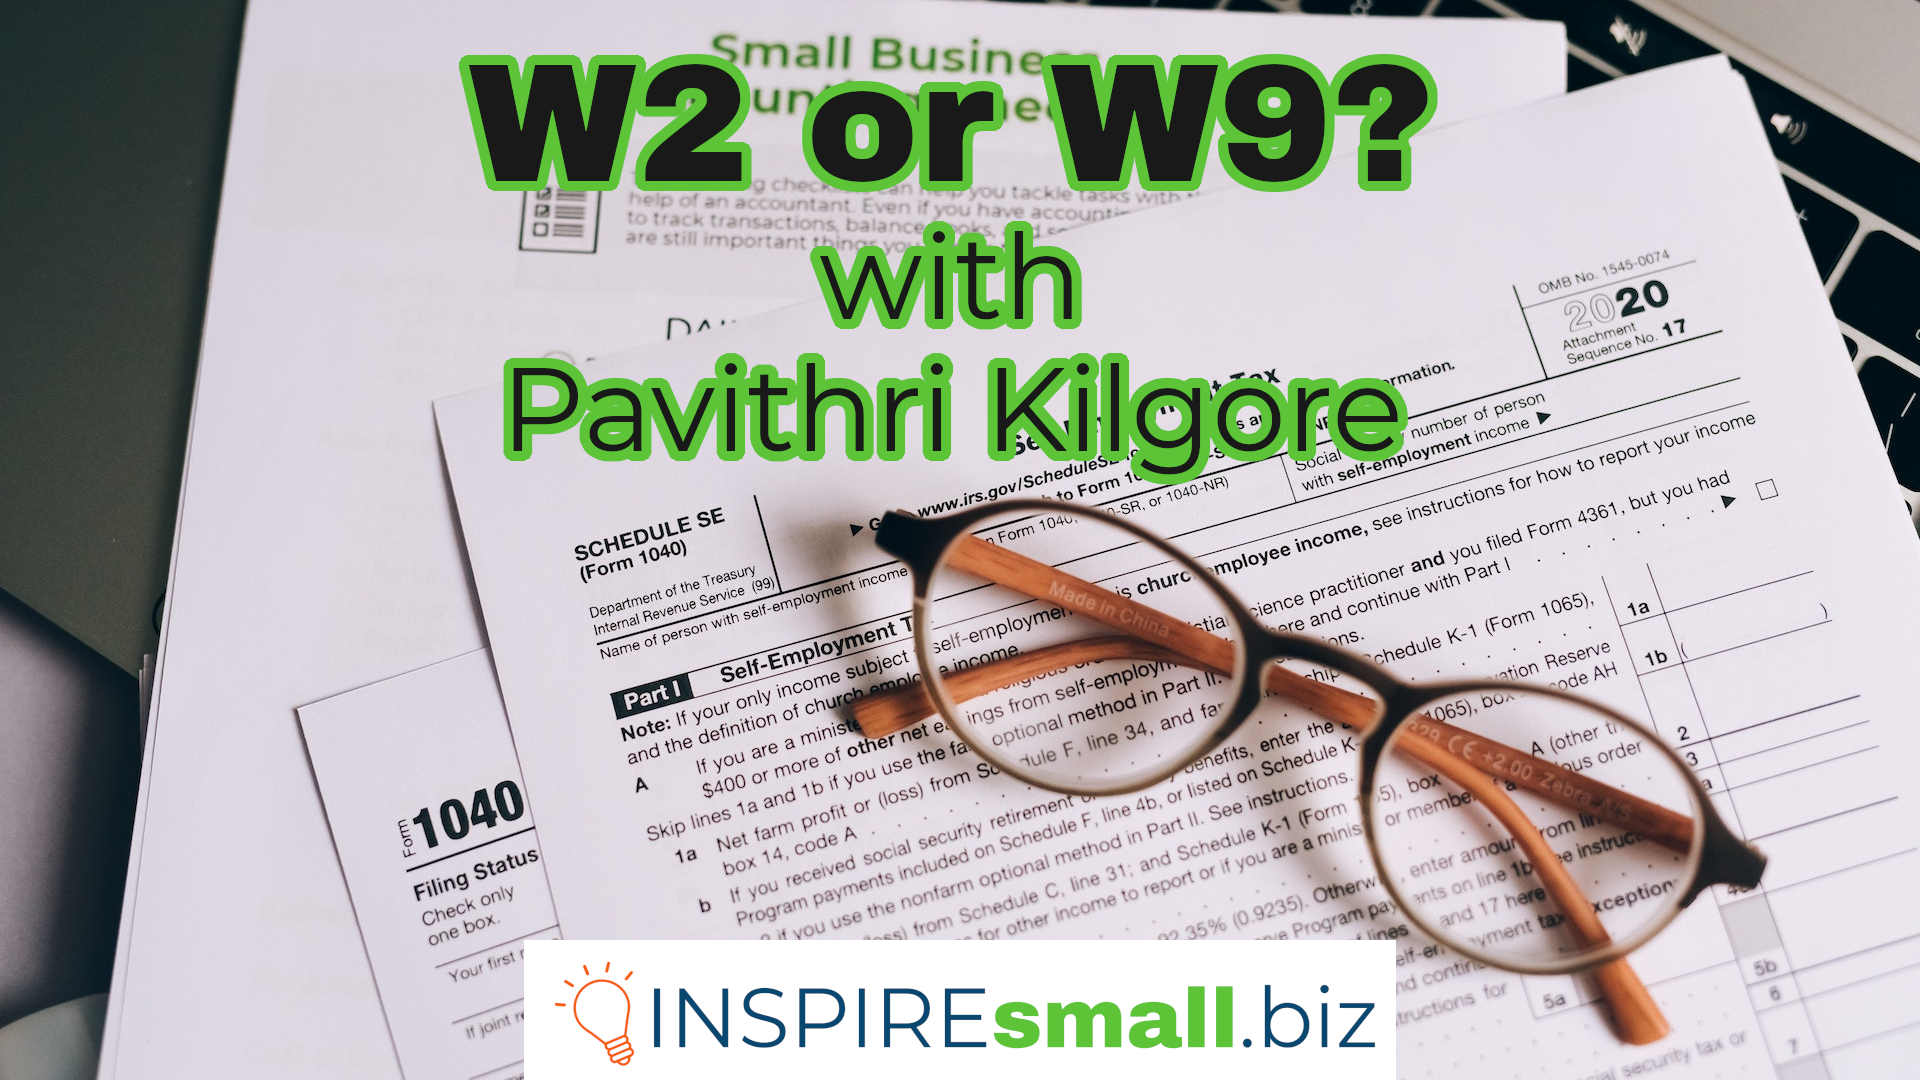 W2 or W9? Pavithri Kilgore talks about small business HR questions at Marketing Inspiration Group, hosted by INSPIREsmall.biz